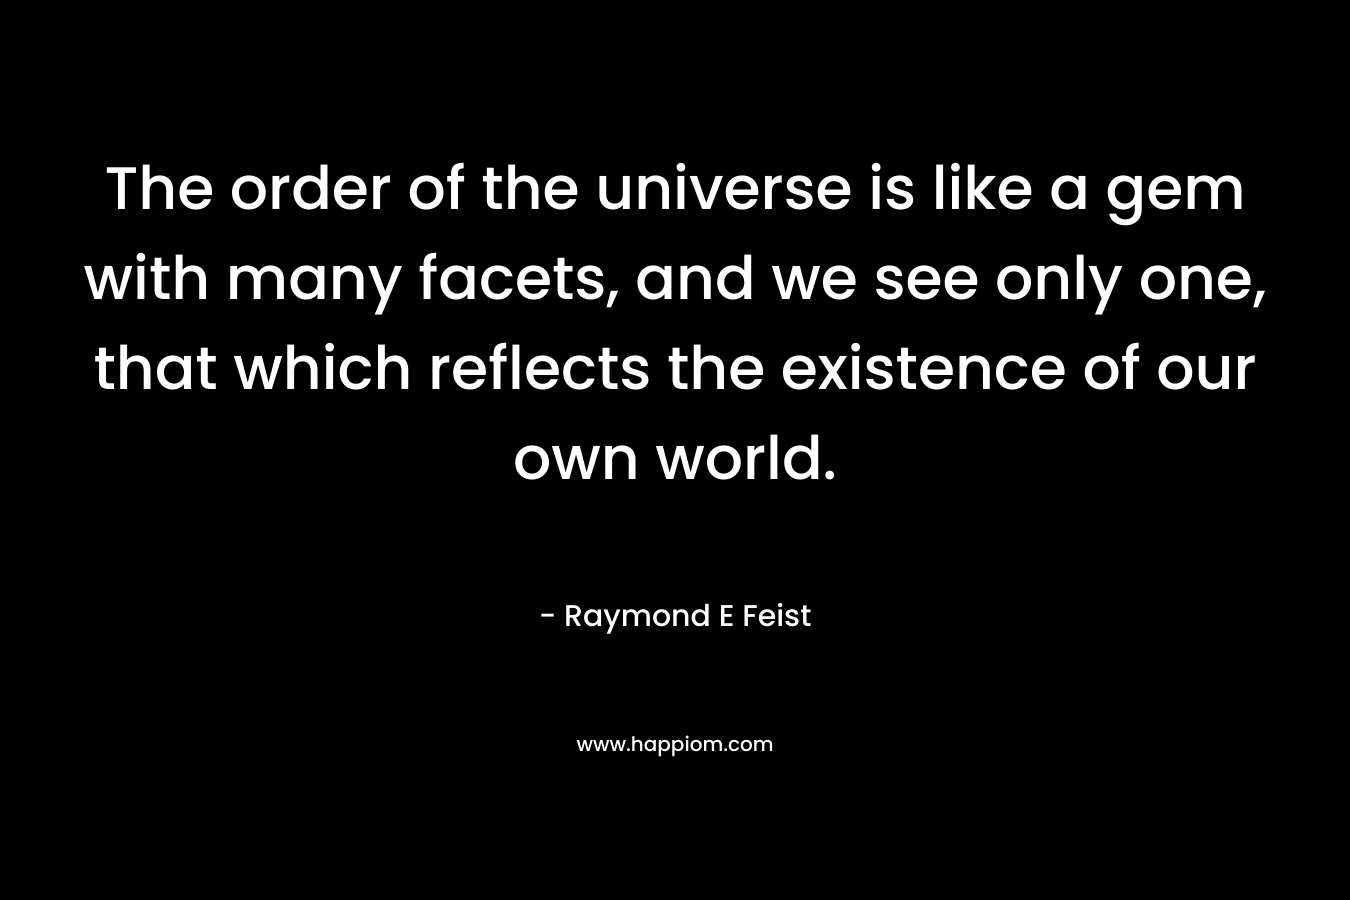 The order of the universe is like a gem with many facets, and we see only one, that which reflects the existence of our own world. – Raymond E Feist